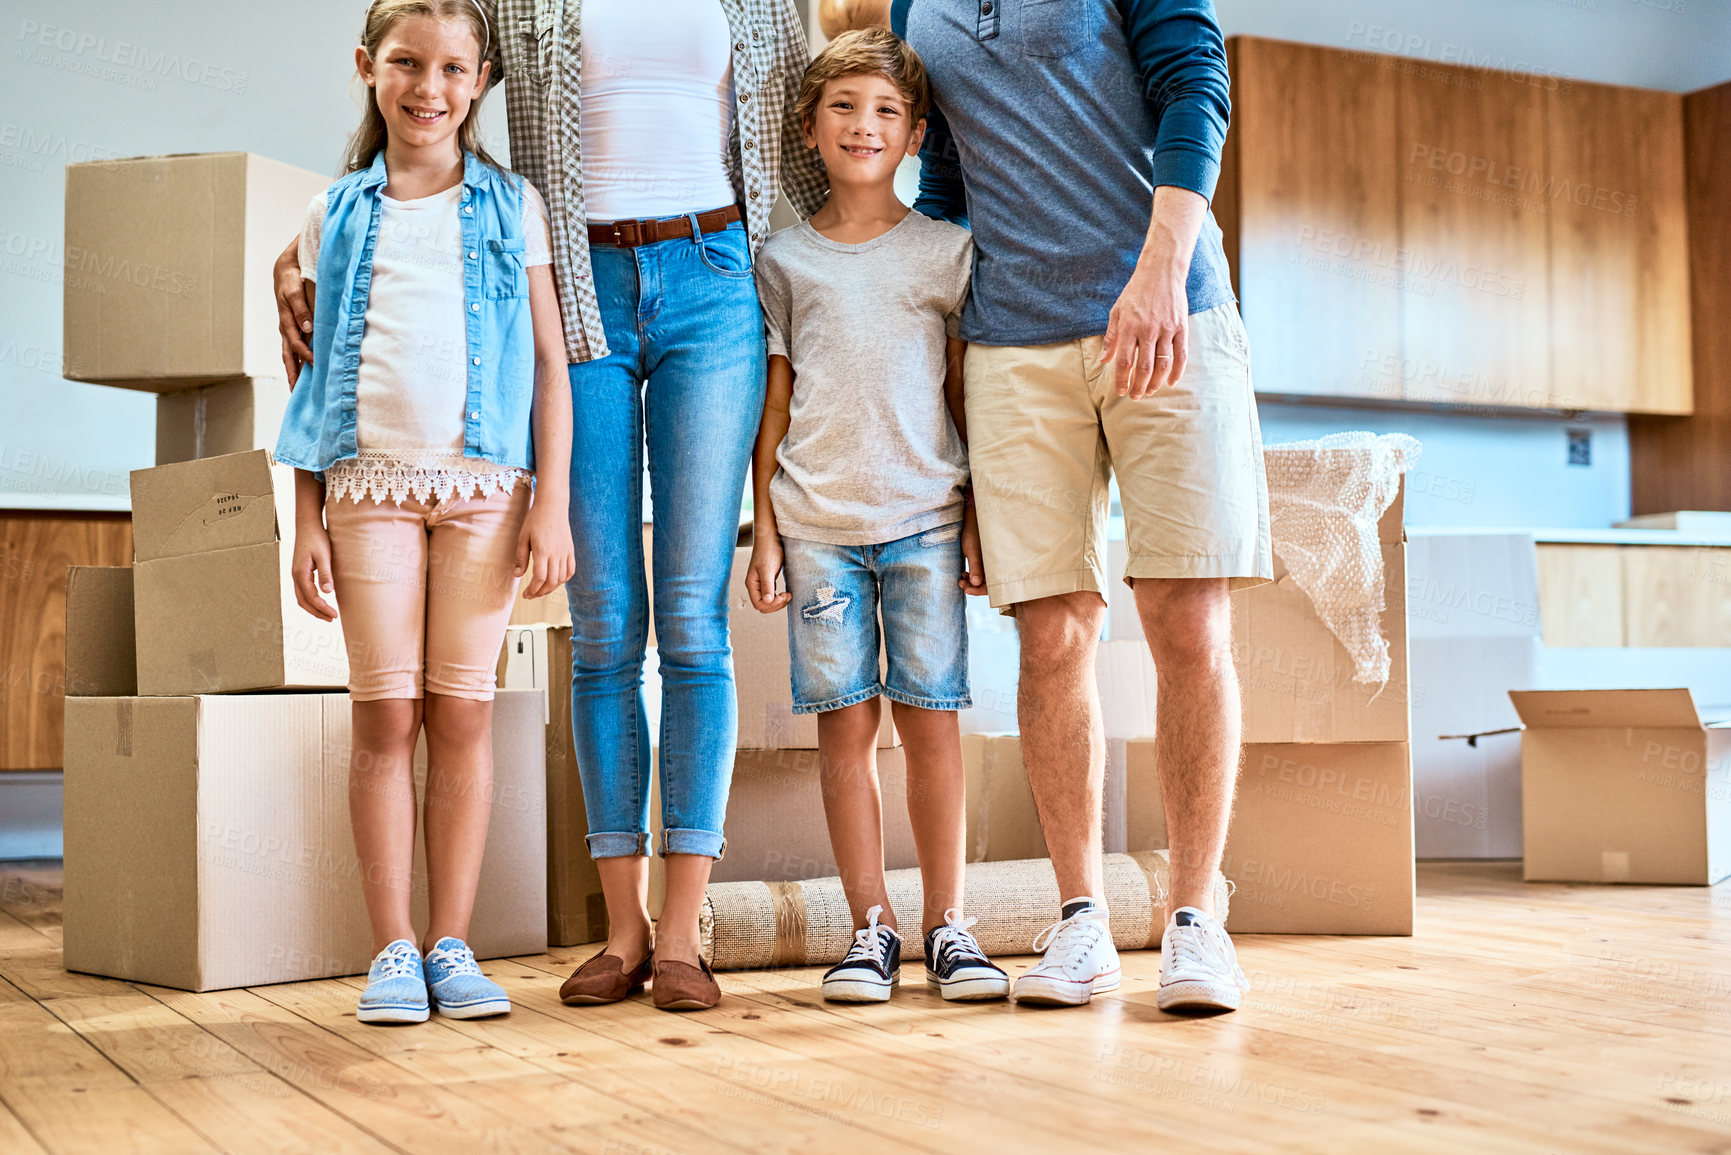 Buy stock photo Portrait of a young brother and sister standing next to their unrecognizable parents inside at home during the day